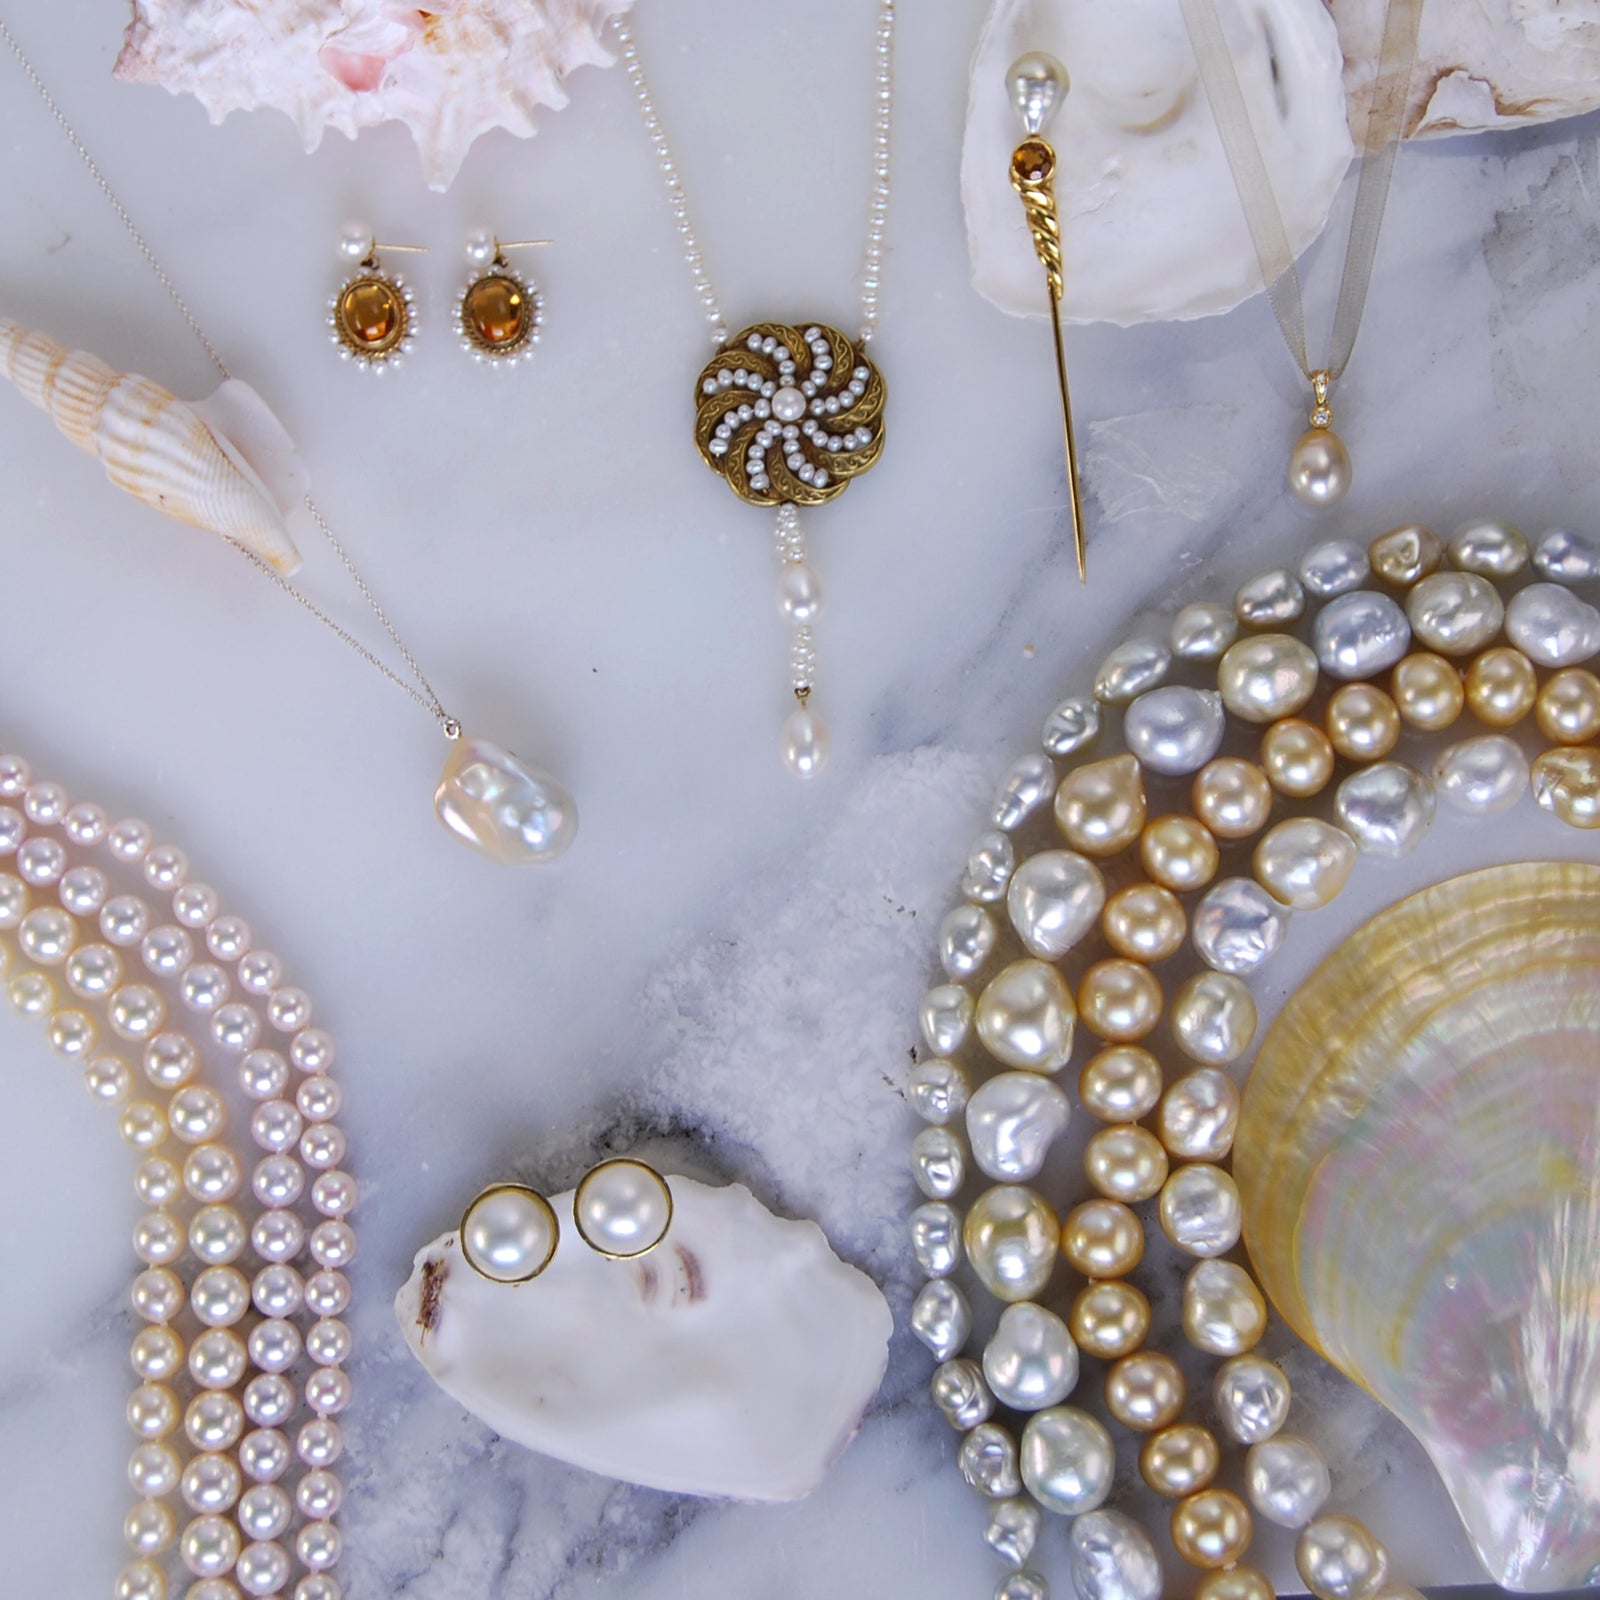 7 Must-Have Pearl Necklaces for Your Jewellery Box